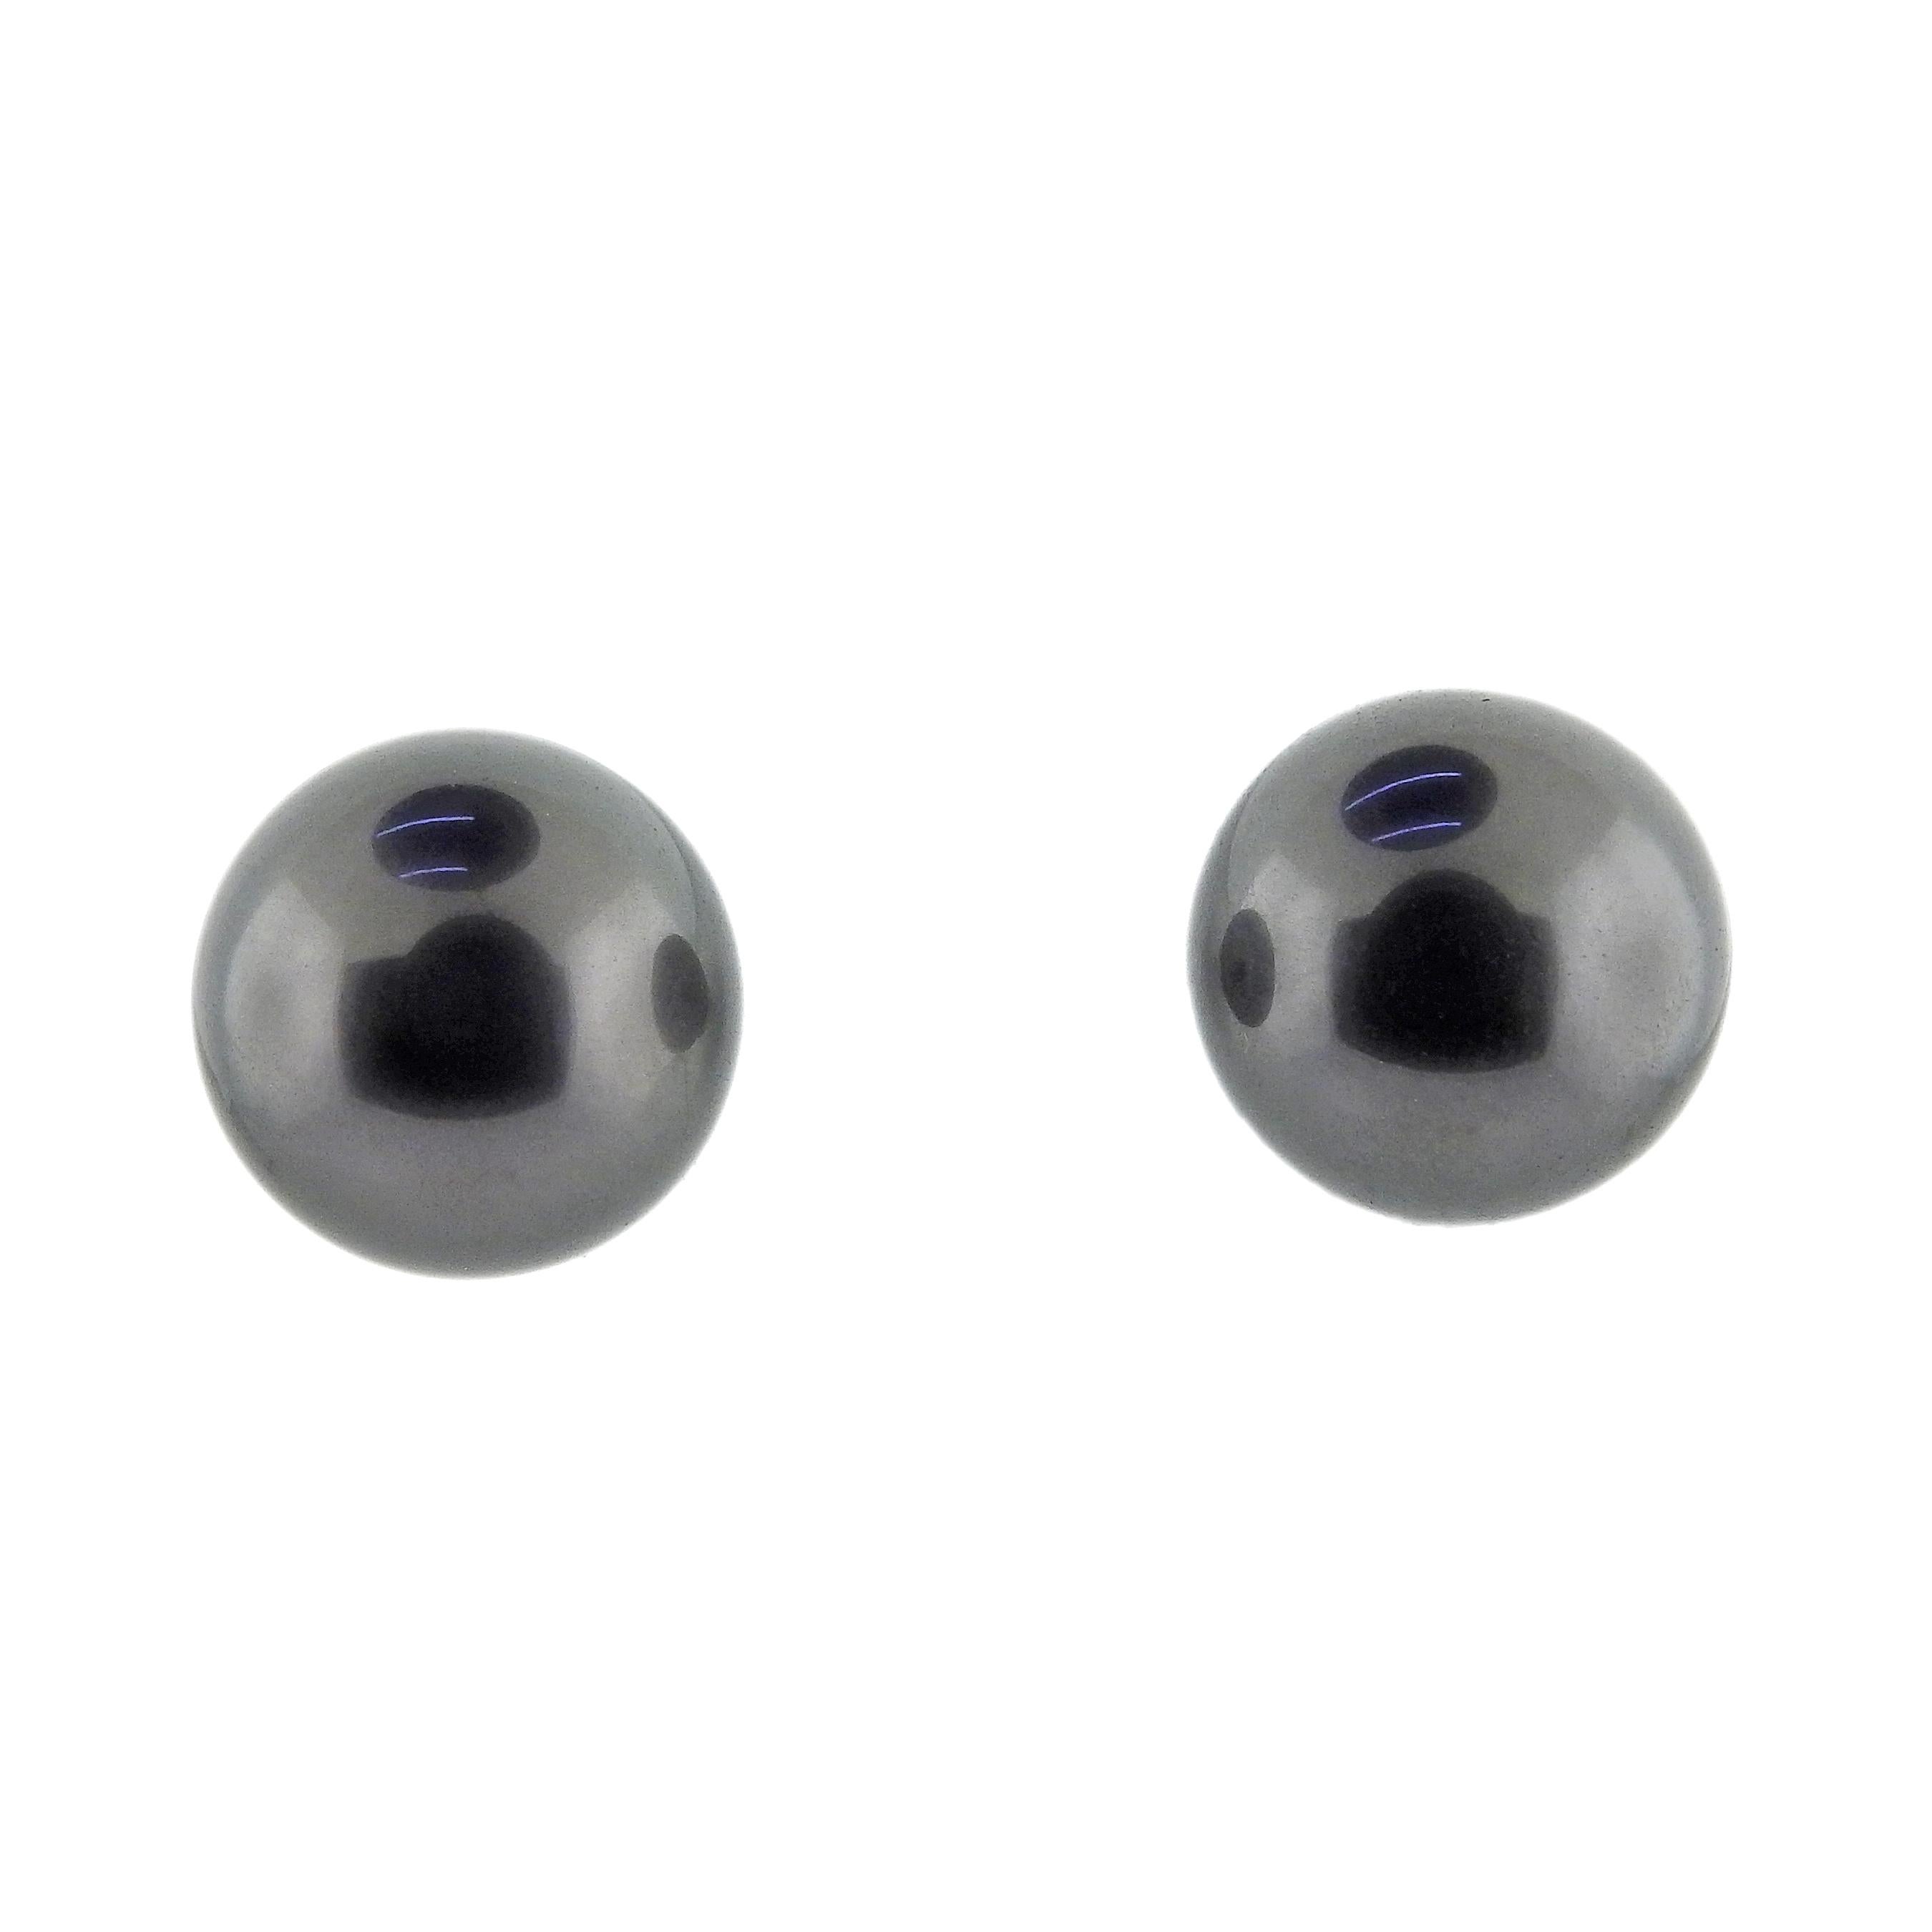 Pair of 18k gold stud earrings by Mikimoto, with A+ black South Sea pearls 10mm. Retail $4200.  Earrings measure 10mm in diameter. Marked: Mikimoto, 750. Weight is 5.3 grams. Come with box and COA. 